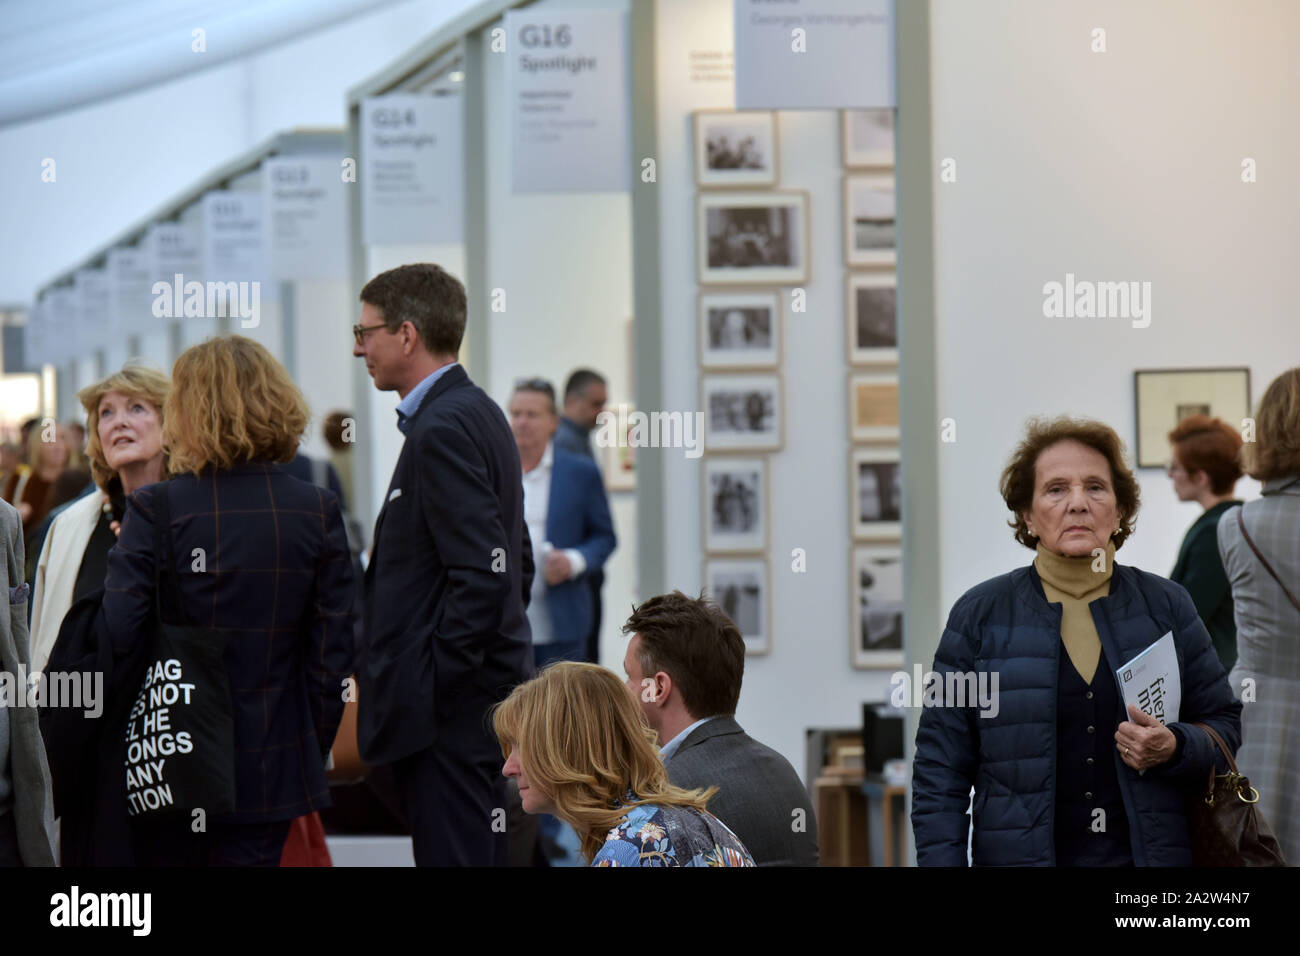 Members of the public, art lovers and collectors attend the opening day of the art fair Freize Masters in Regent's Park, London, where galleries from Stock Photo